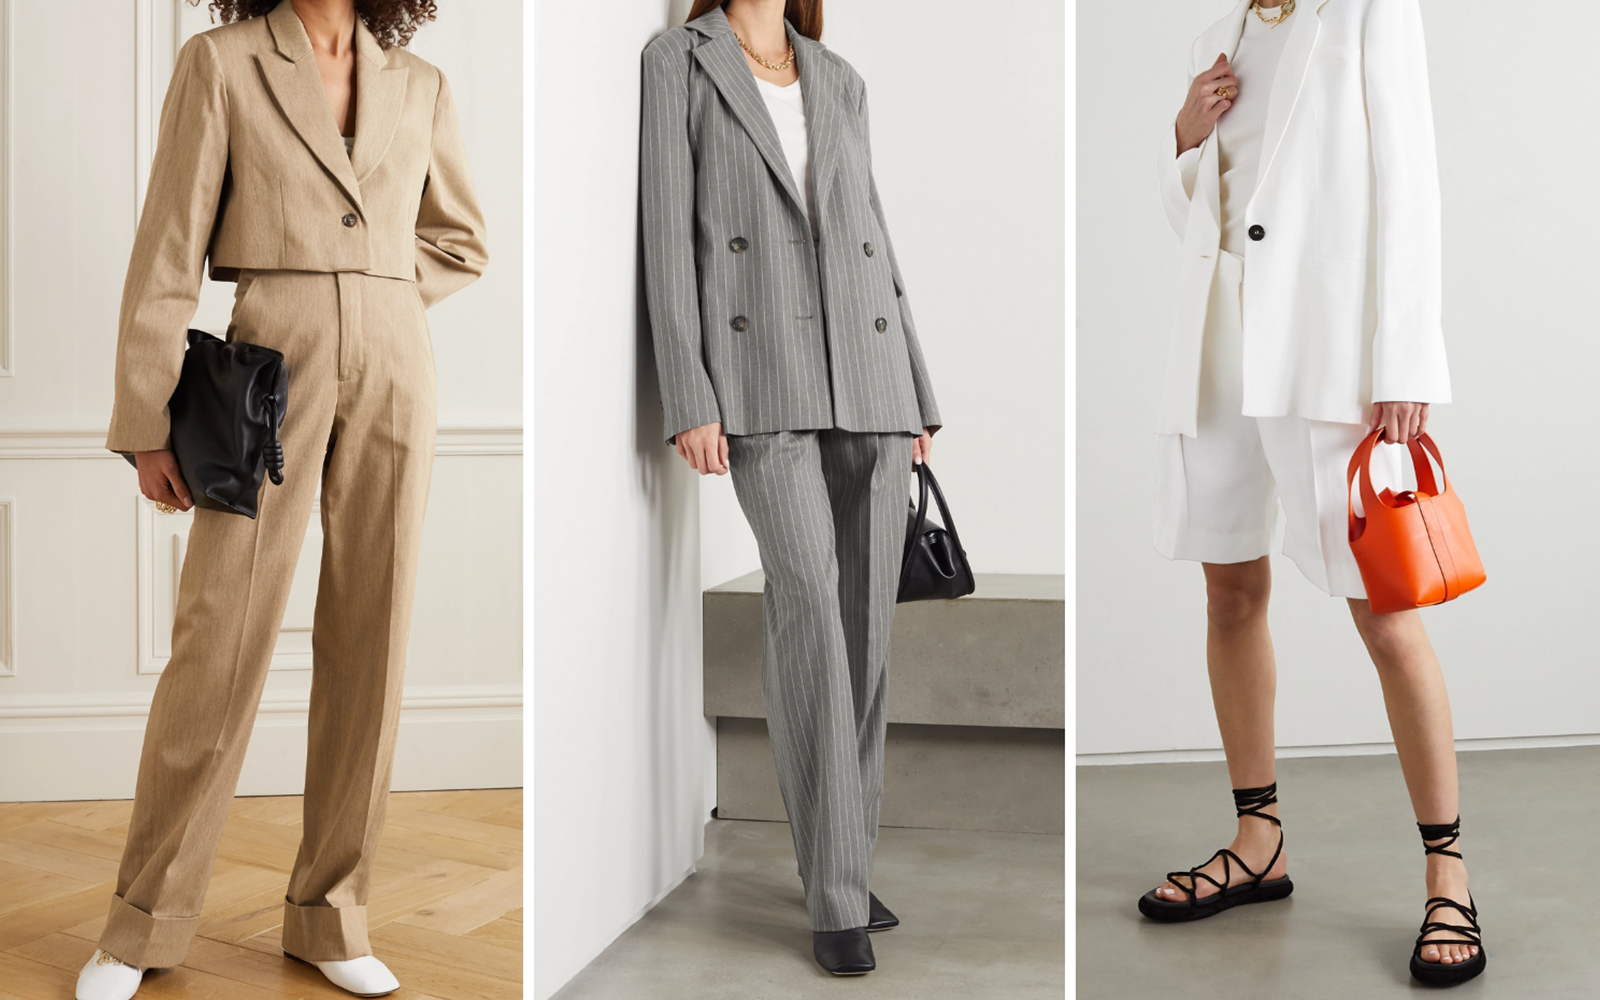 The Suit Of The Week: Argent